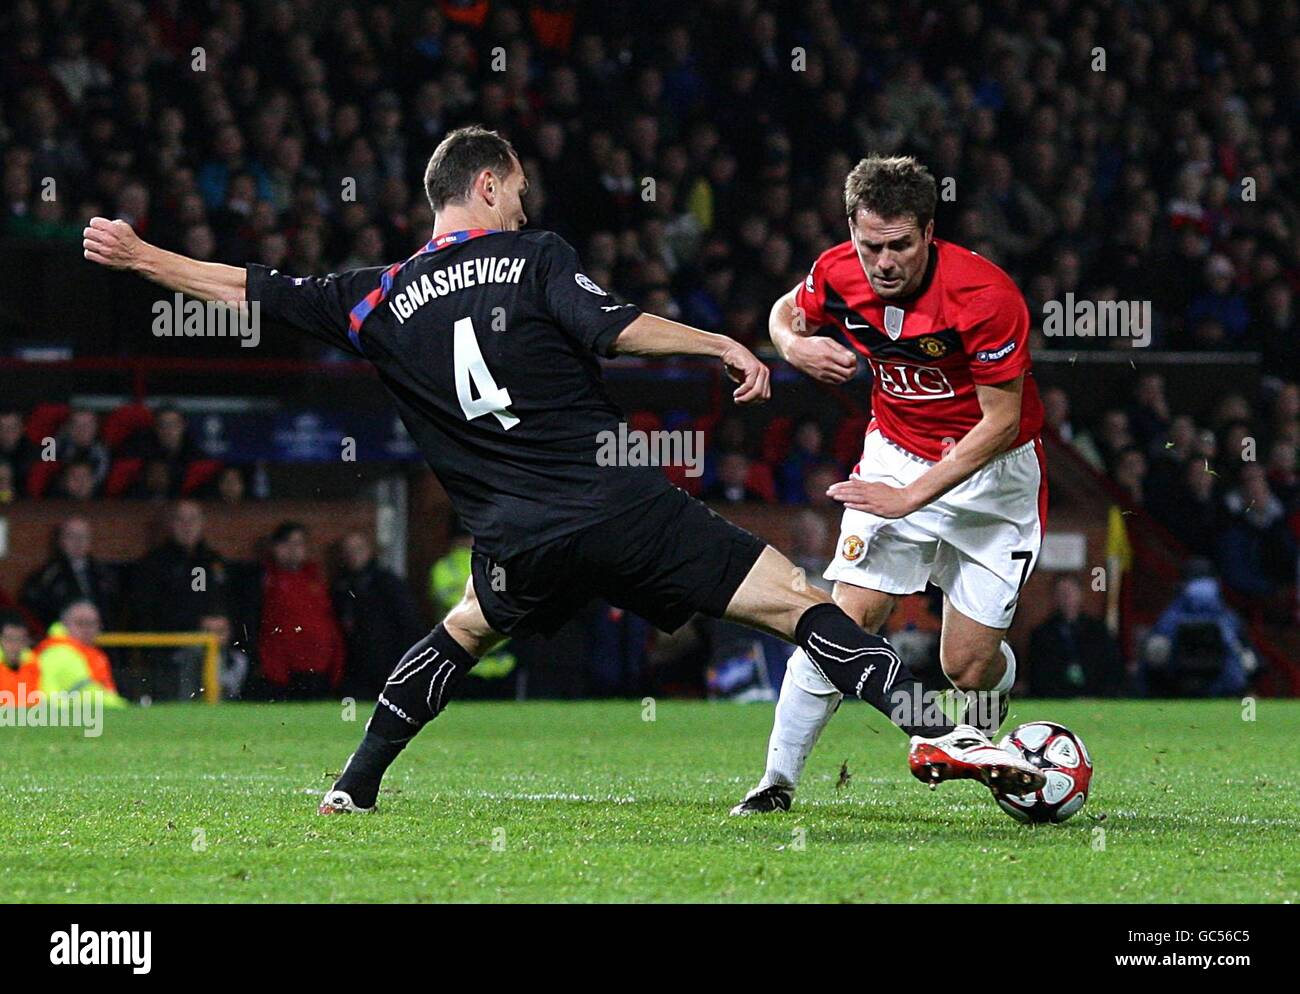 Soccer - UEFA Champions League - Group B - Manchester United v CSKA Moscow - Old Trafford. Manchester United's Michael Owen gets tackled by CSKA Moscow's Sergei Ignashevich Stock Photo